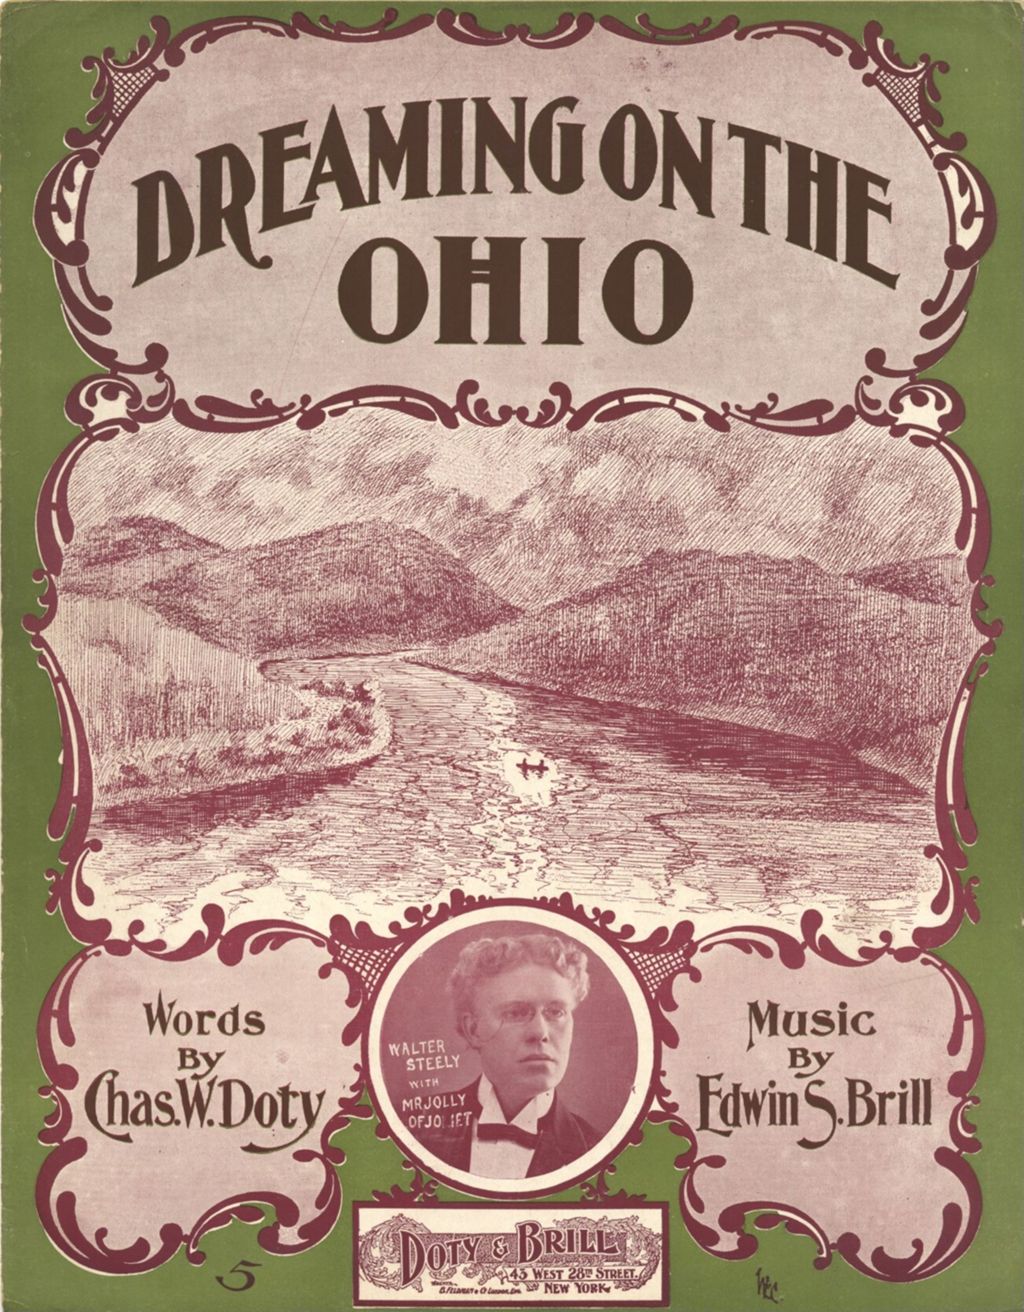 Miniature of Dreaming on the Ohio